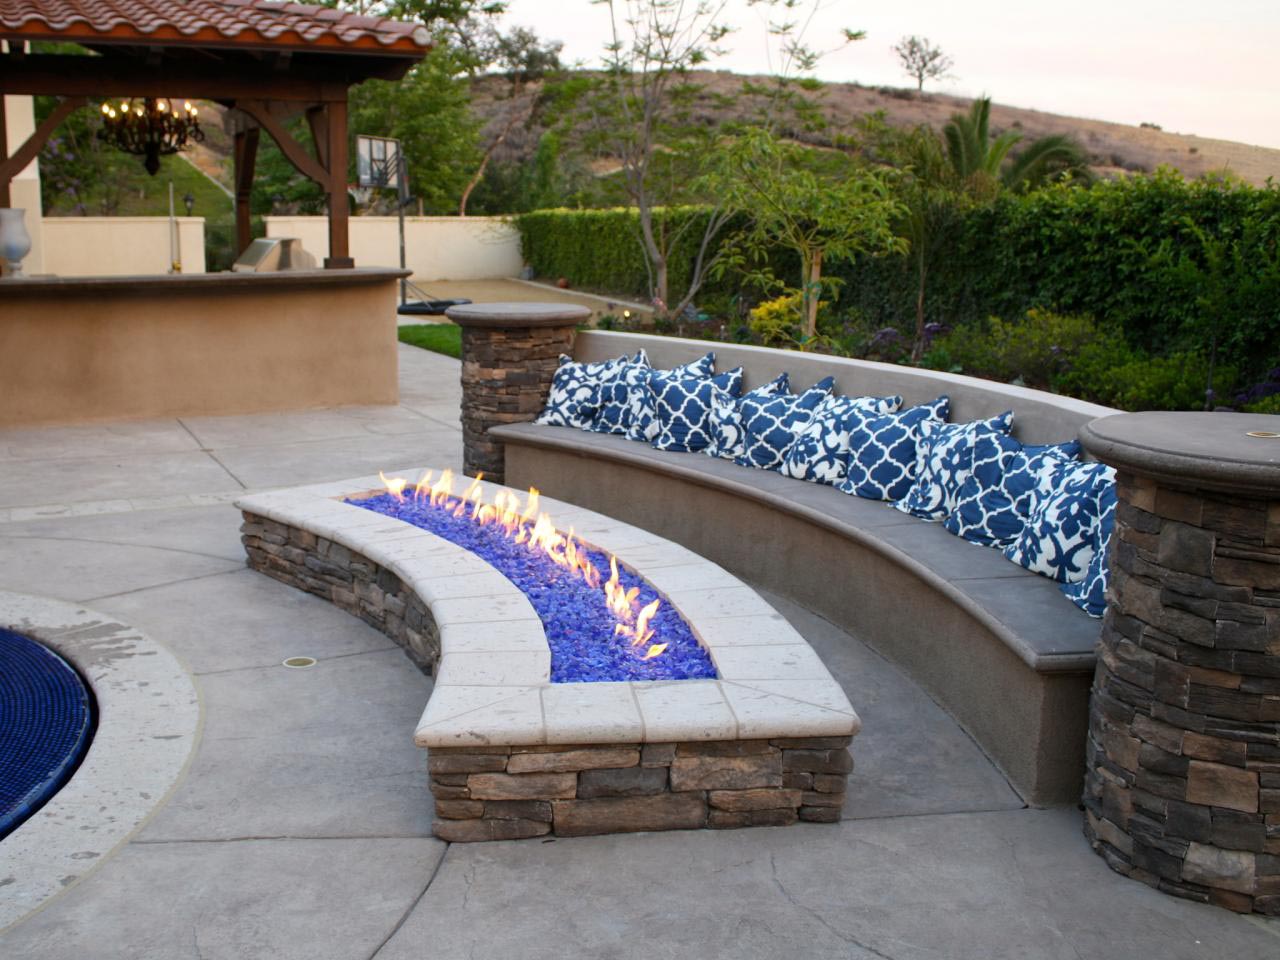 11 Super Cool Cozy Fire Pits Ideas To, Outdoor Fire Pit With Glass Rocks